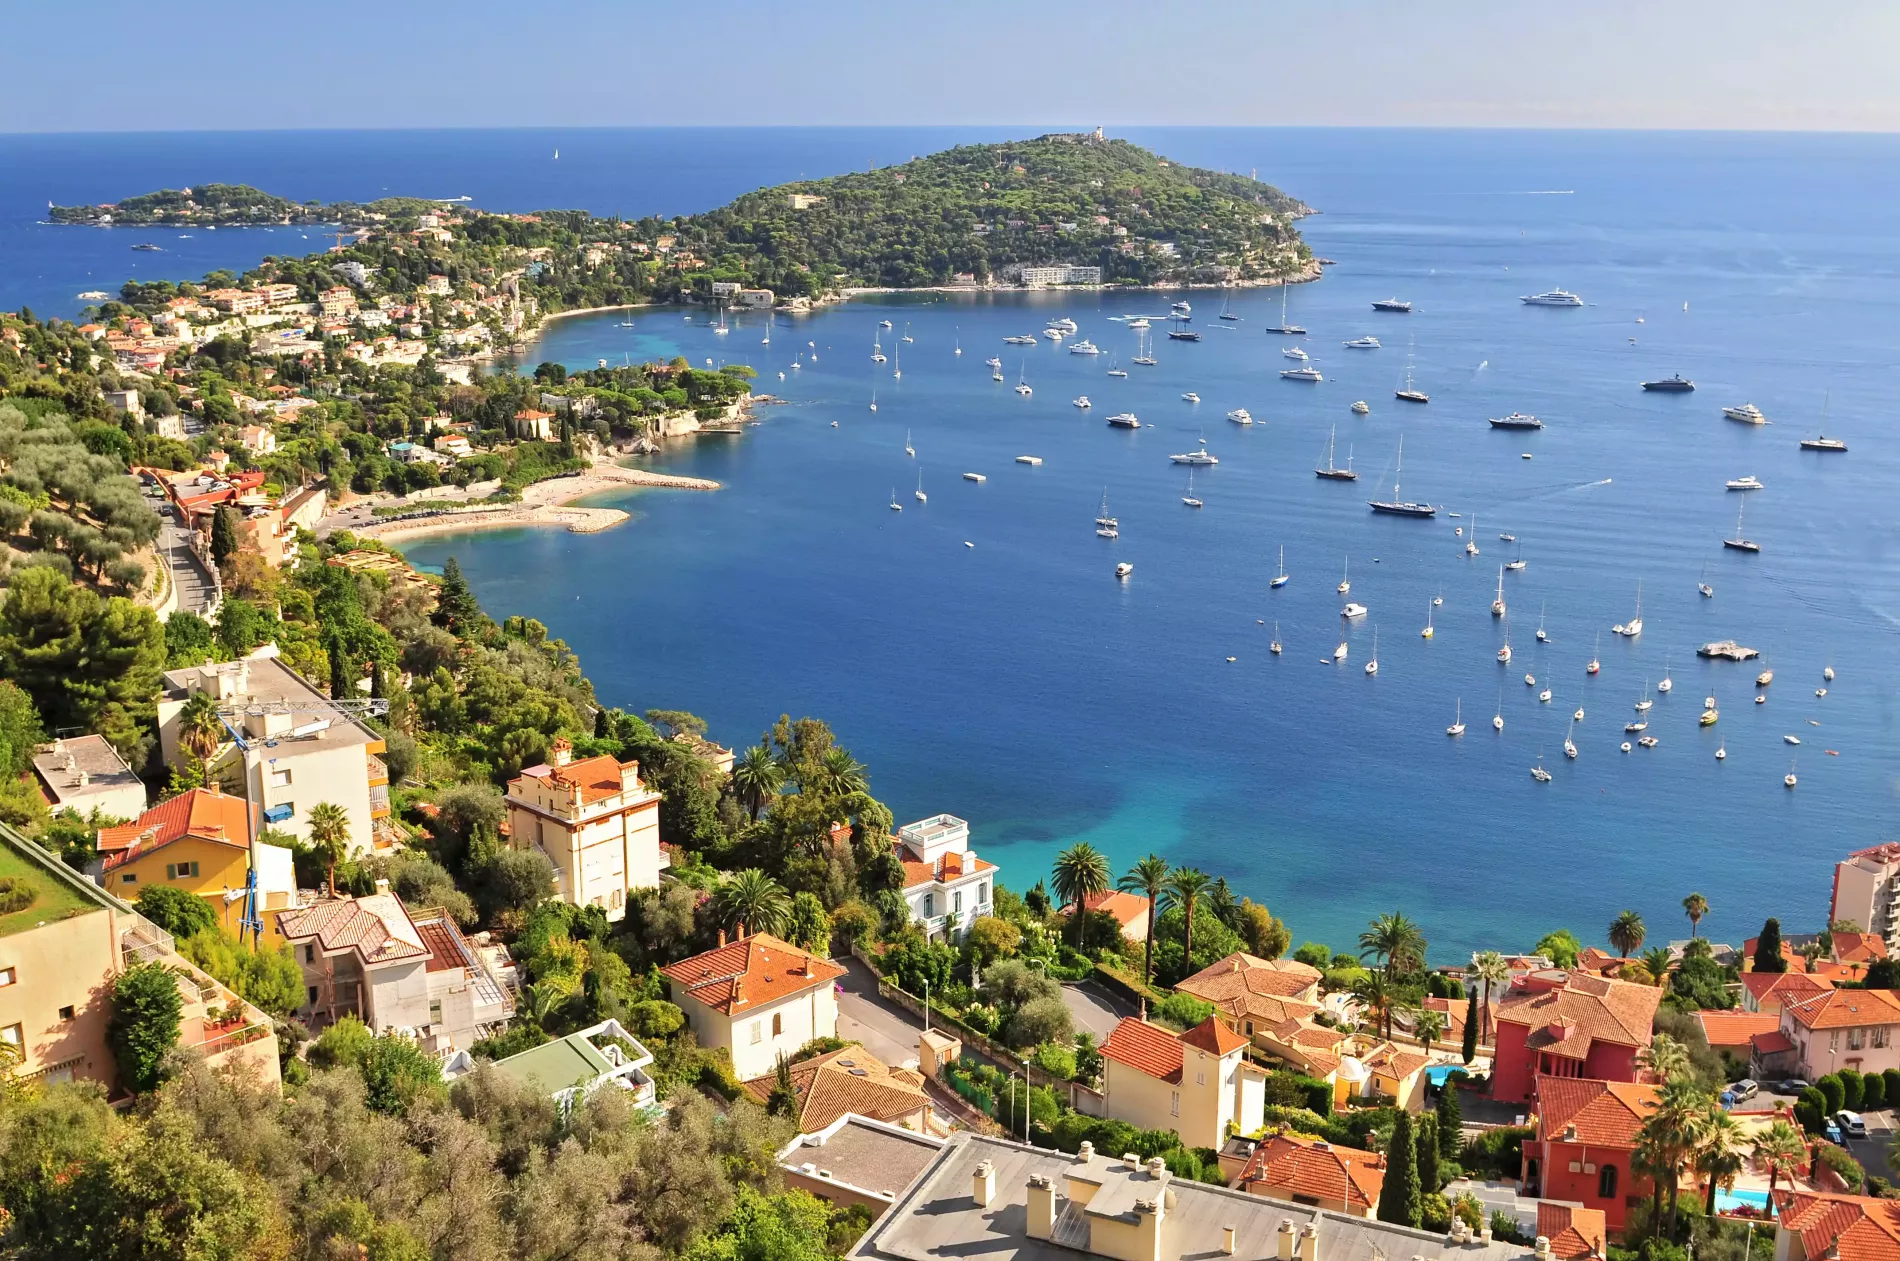 French Riviera and Saint-Tropez